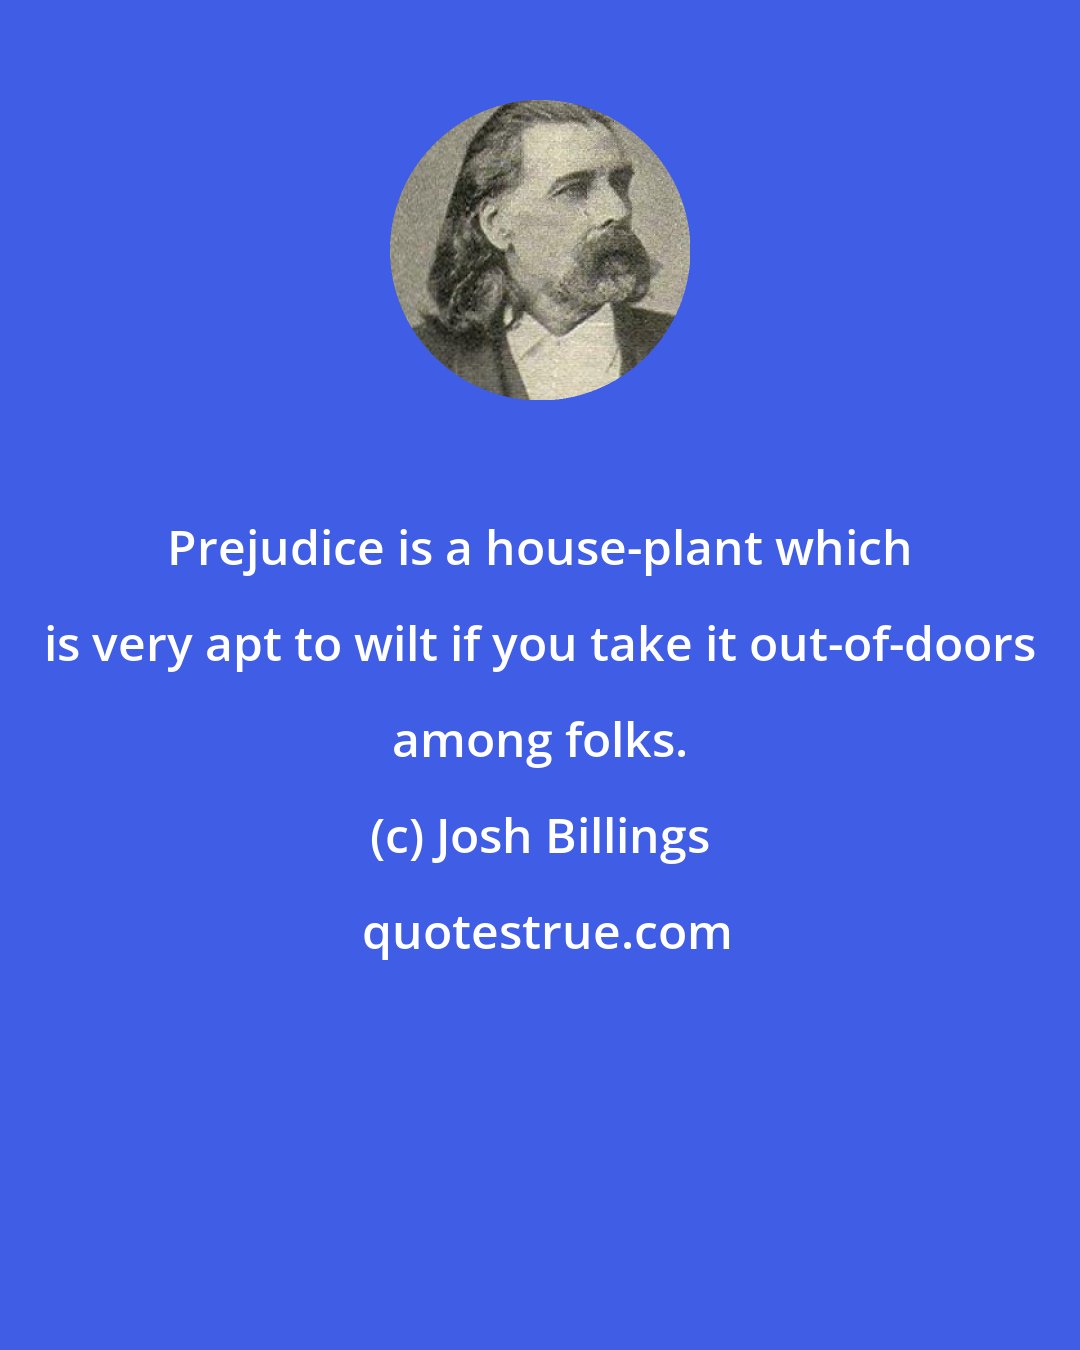 Josh Billings: Prejudice is a house-plant which is very apt to wilt if you take it out-of-doors among folks.